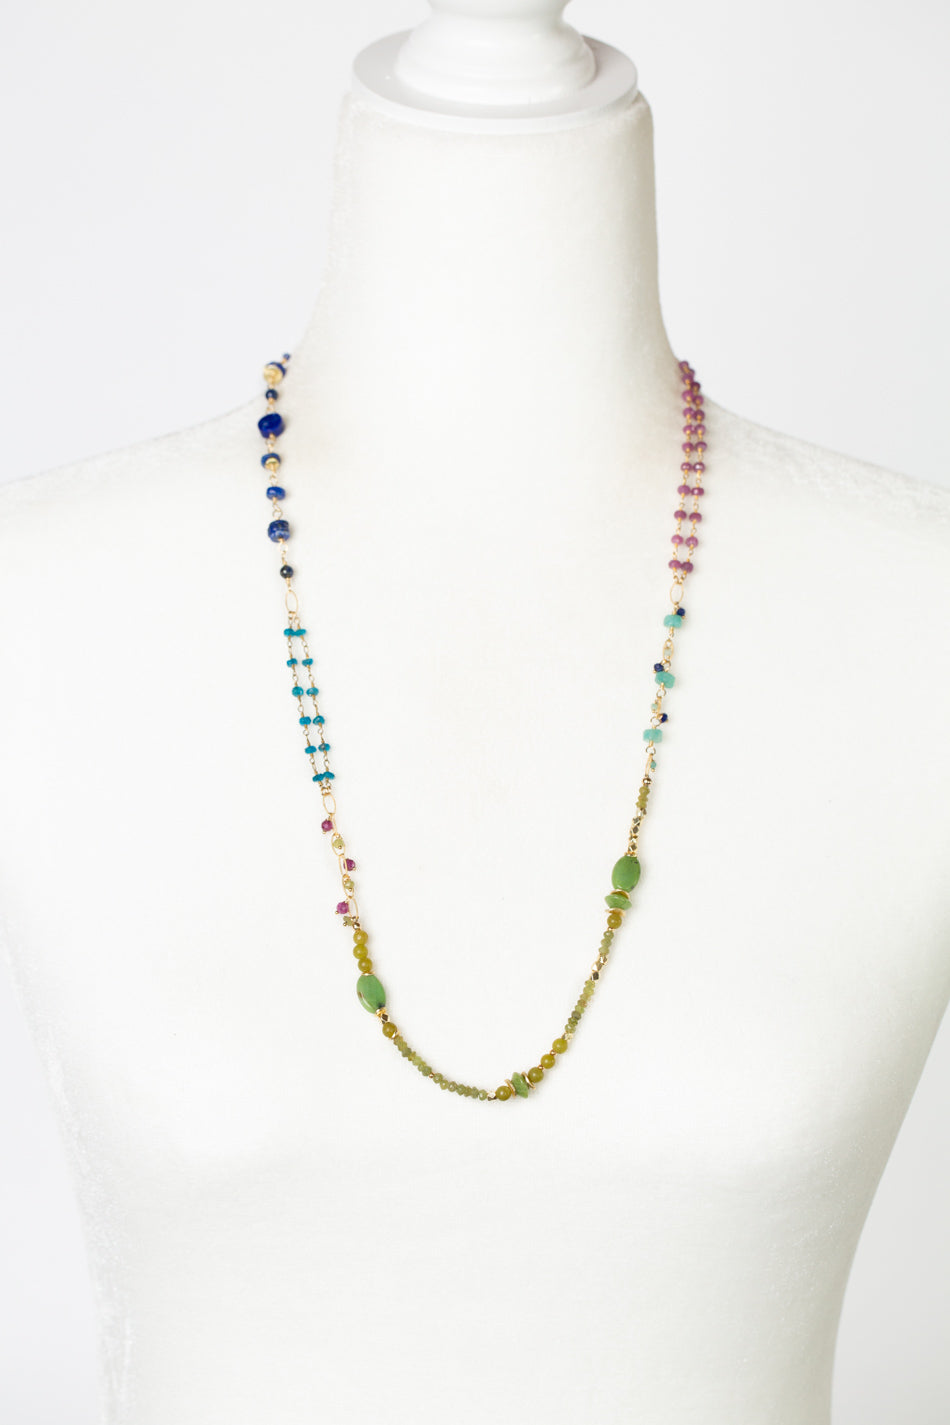 Aurora 26-28" Faceted Ruby, Lapis Lazuli, Chrysoprase Collage Necklace